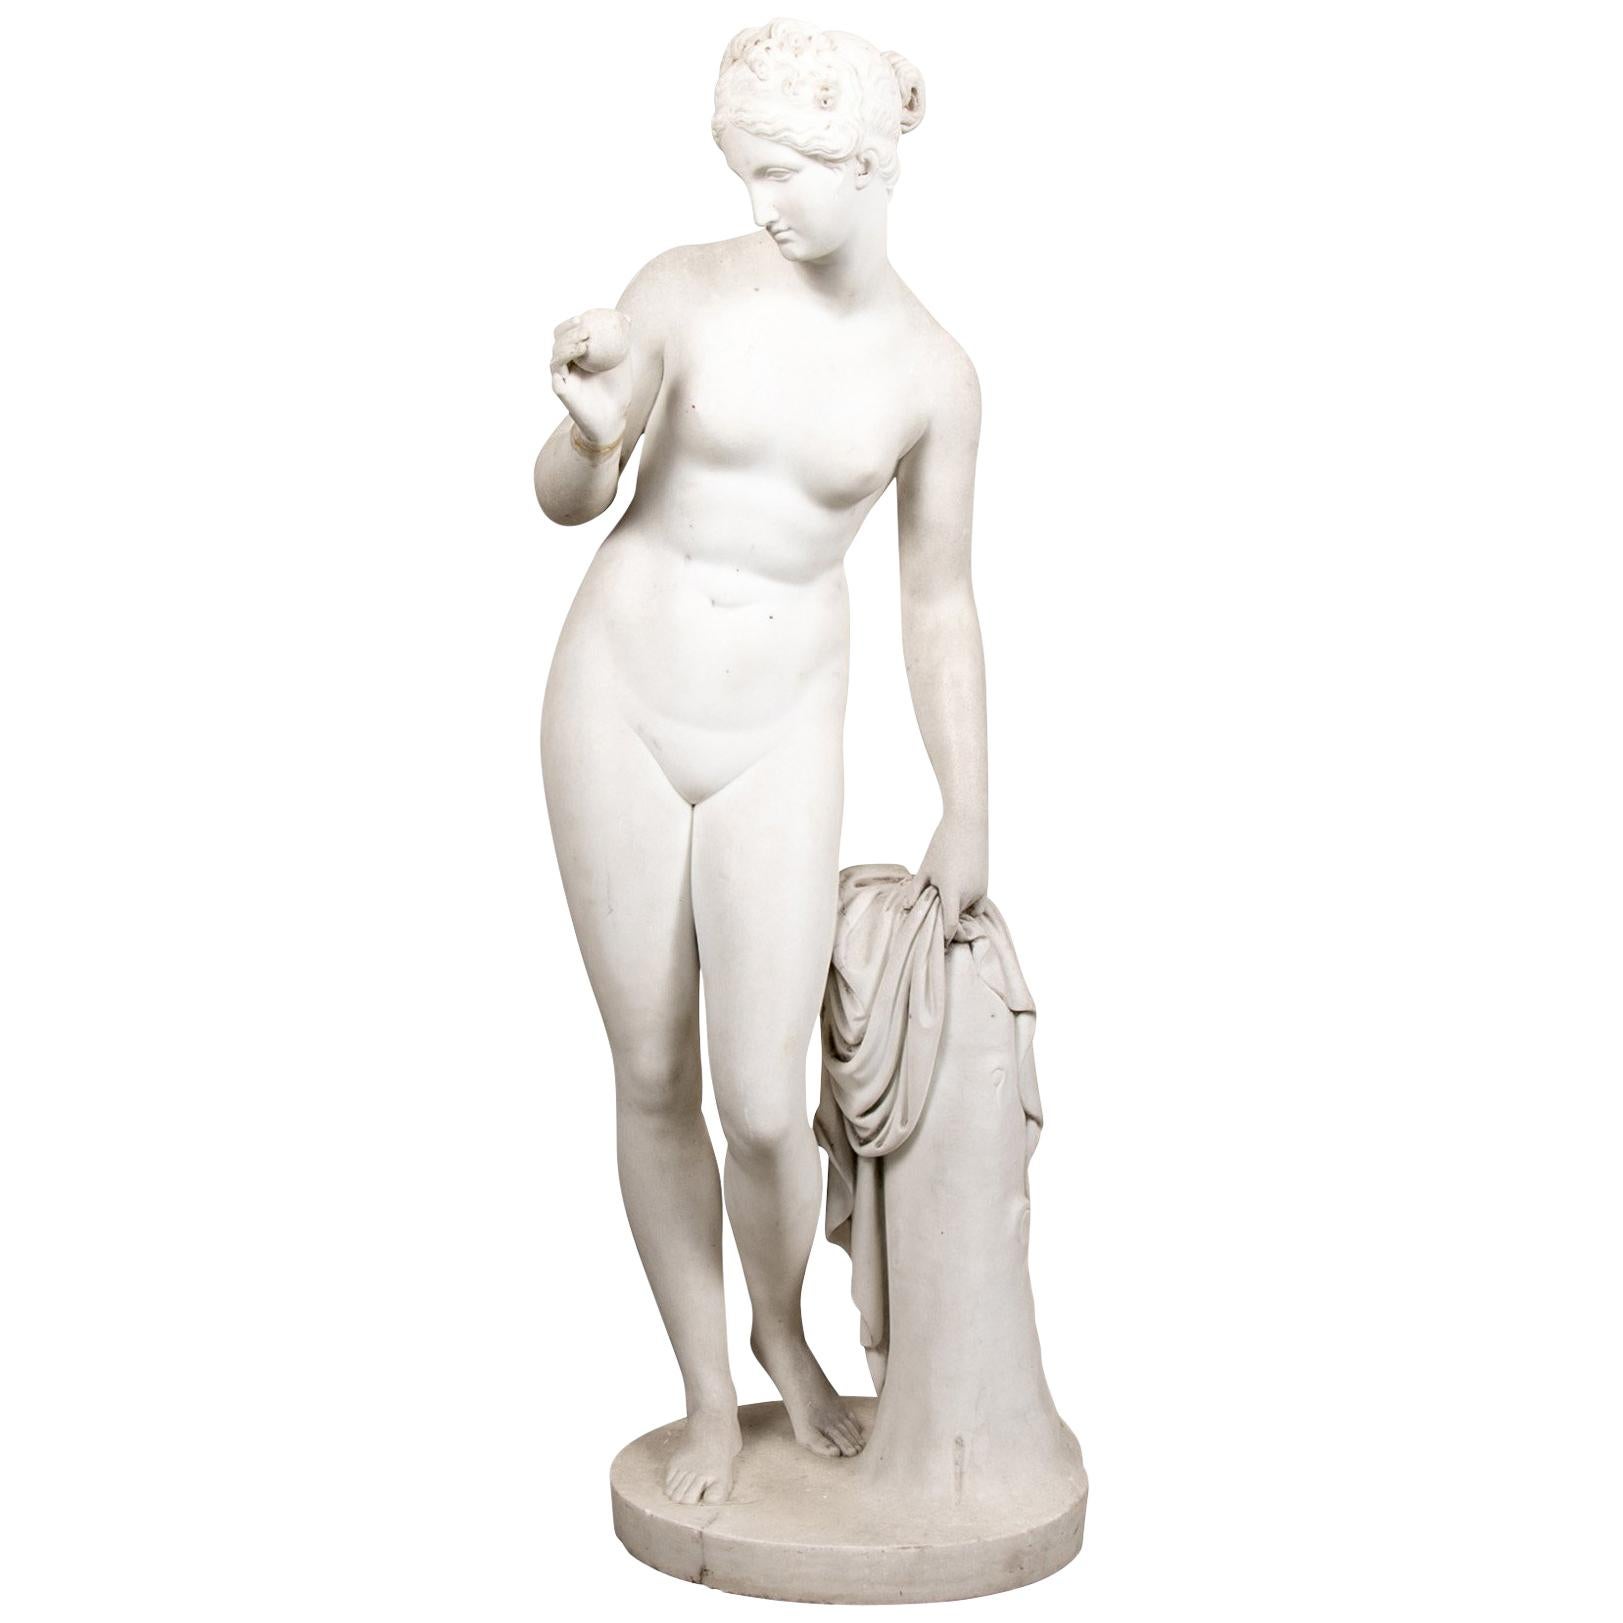 Carved Marble Classical Figure of the Goddess Aphrodite Holding "Golden Apple"